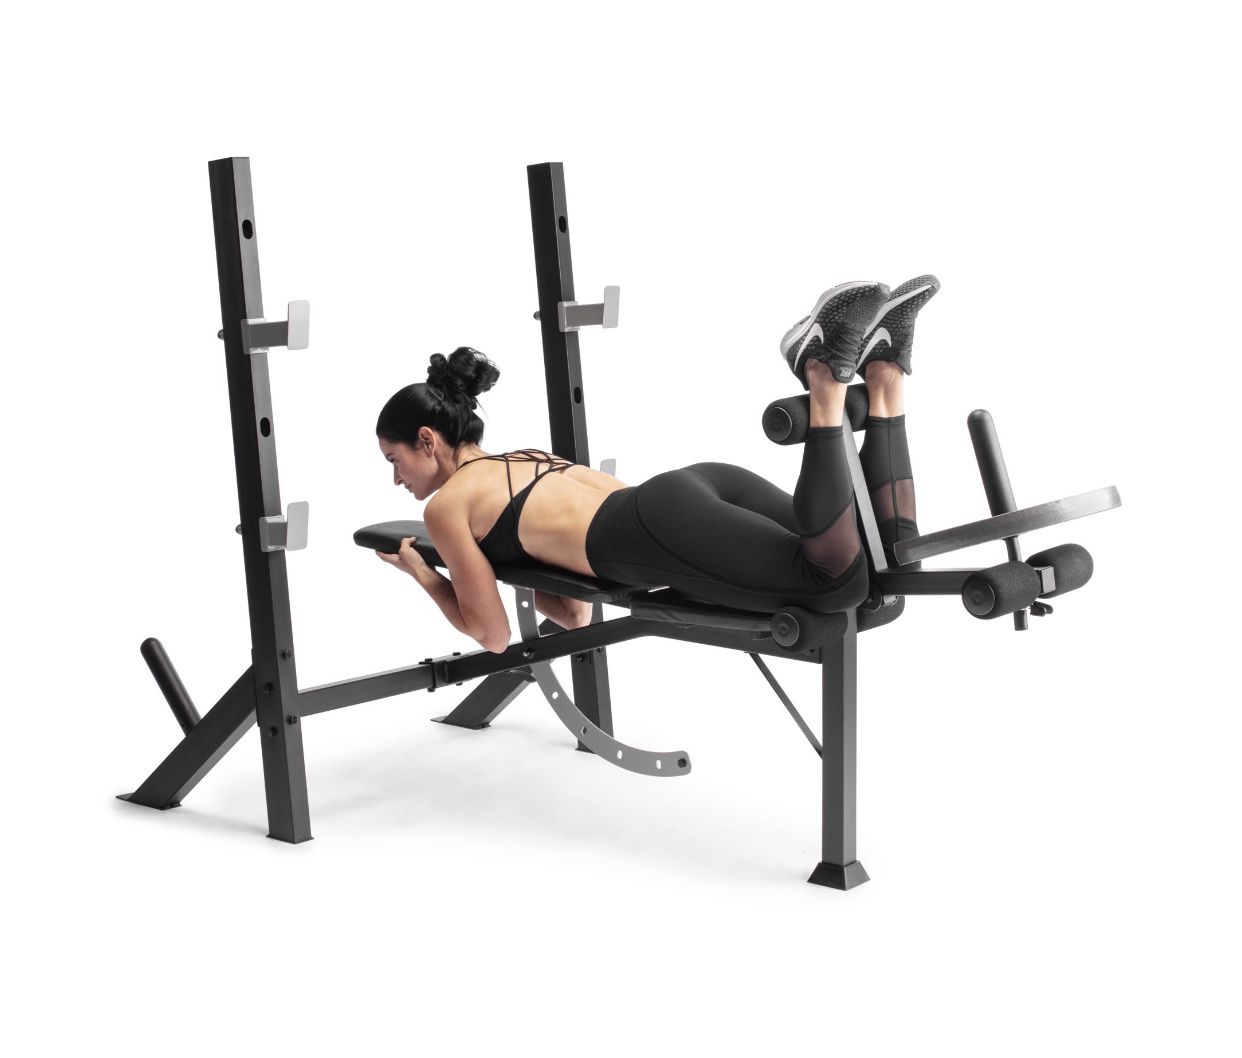 NEW IN BOX Olympic bench press